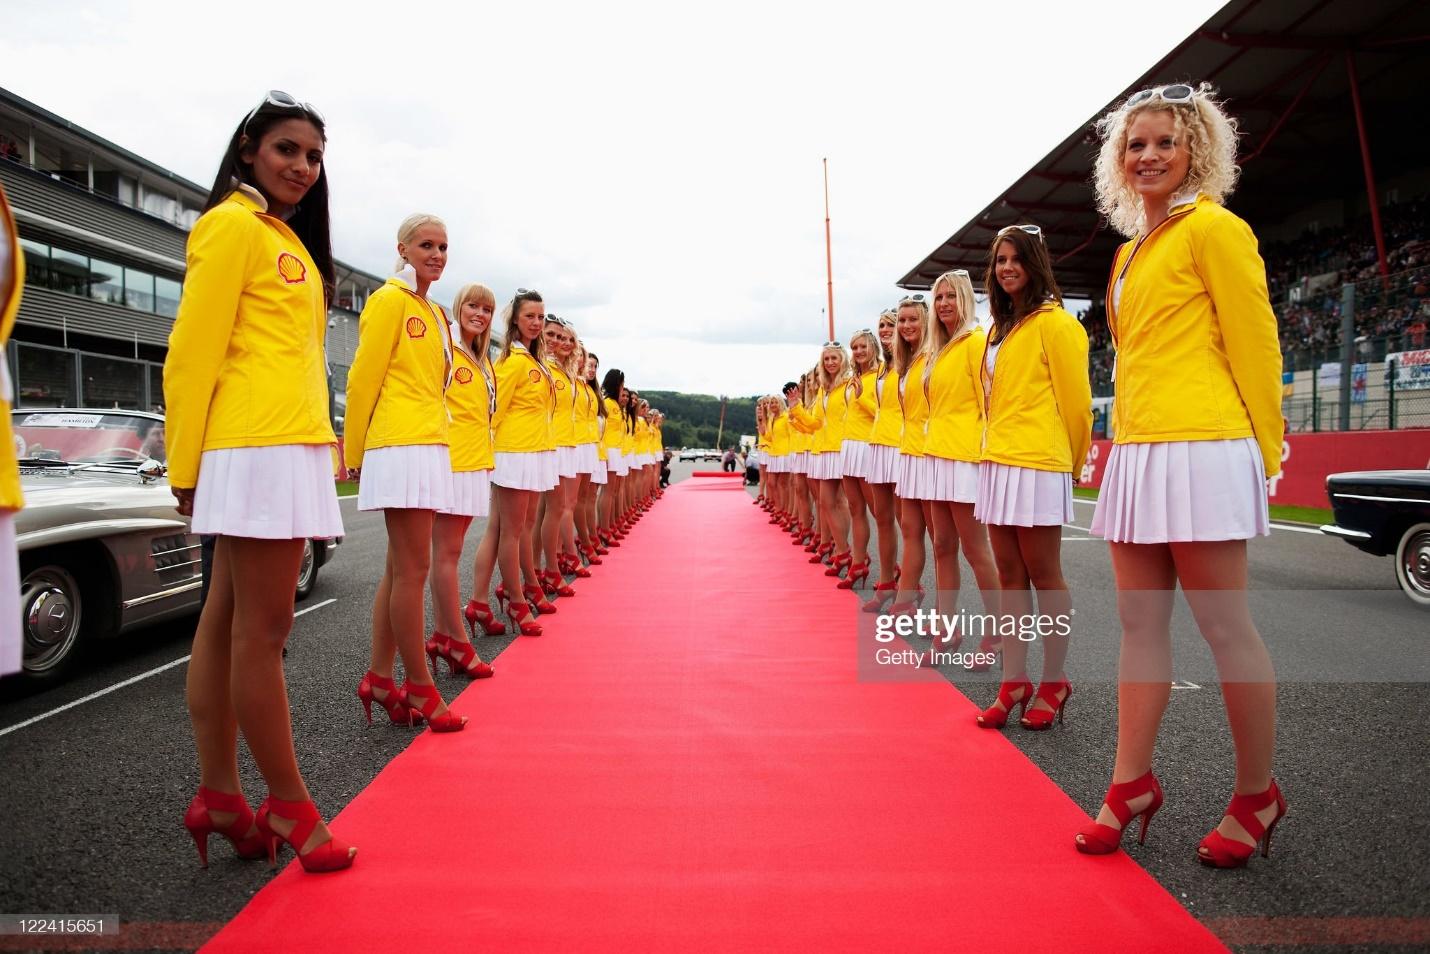 D:\Documenti\posts\posts\Women and motorsport\foto\Getty e altre\shell-grid-girls-are-seen-before-the-belgian-formula-one-grand-prix-picture-id122415651.jpg